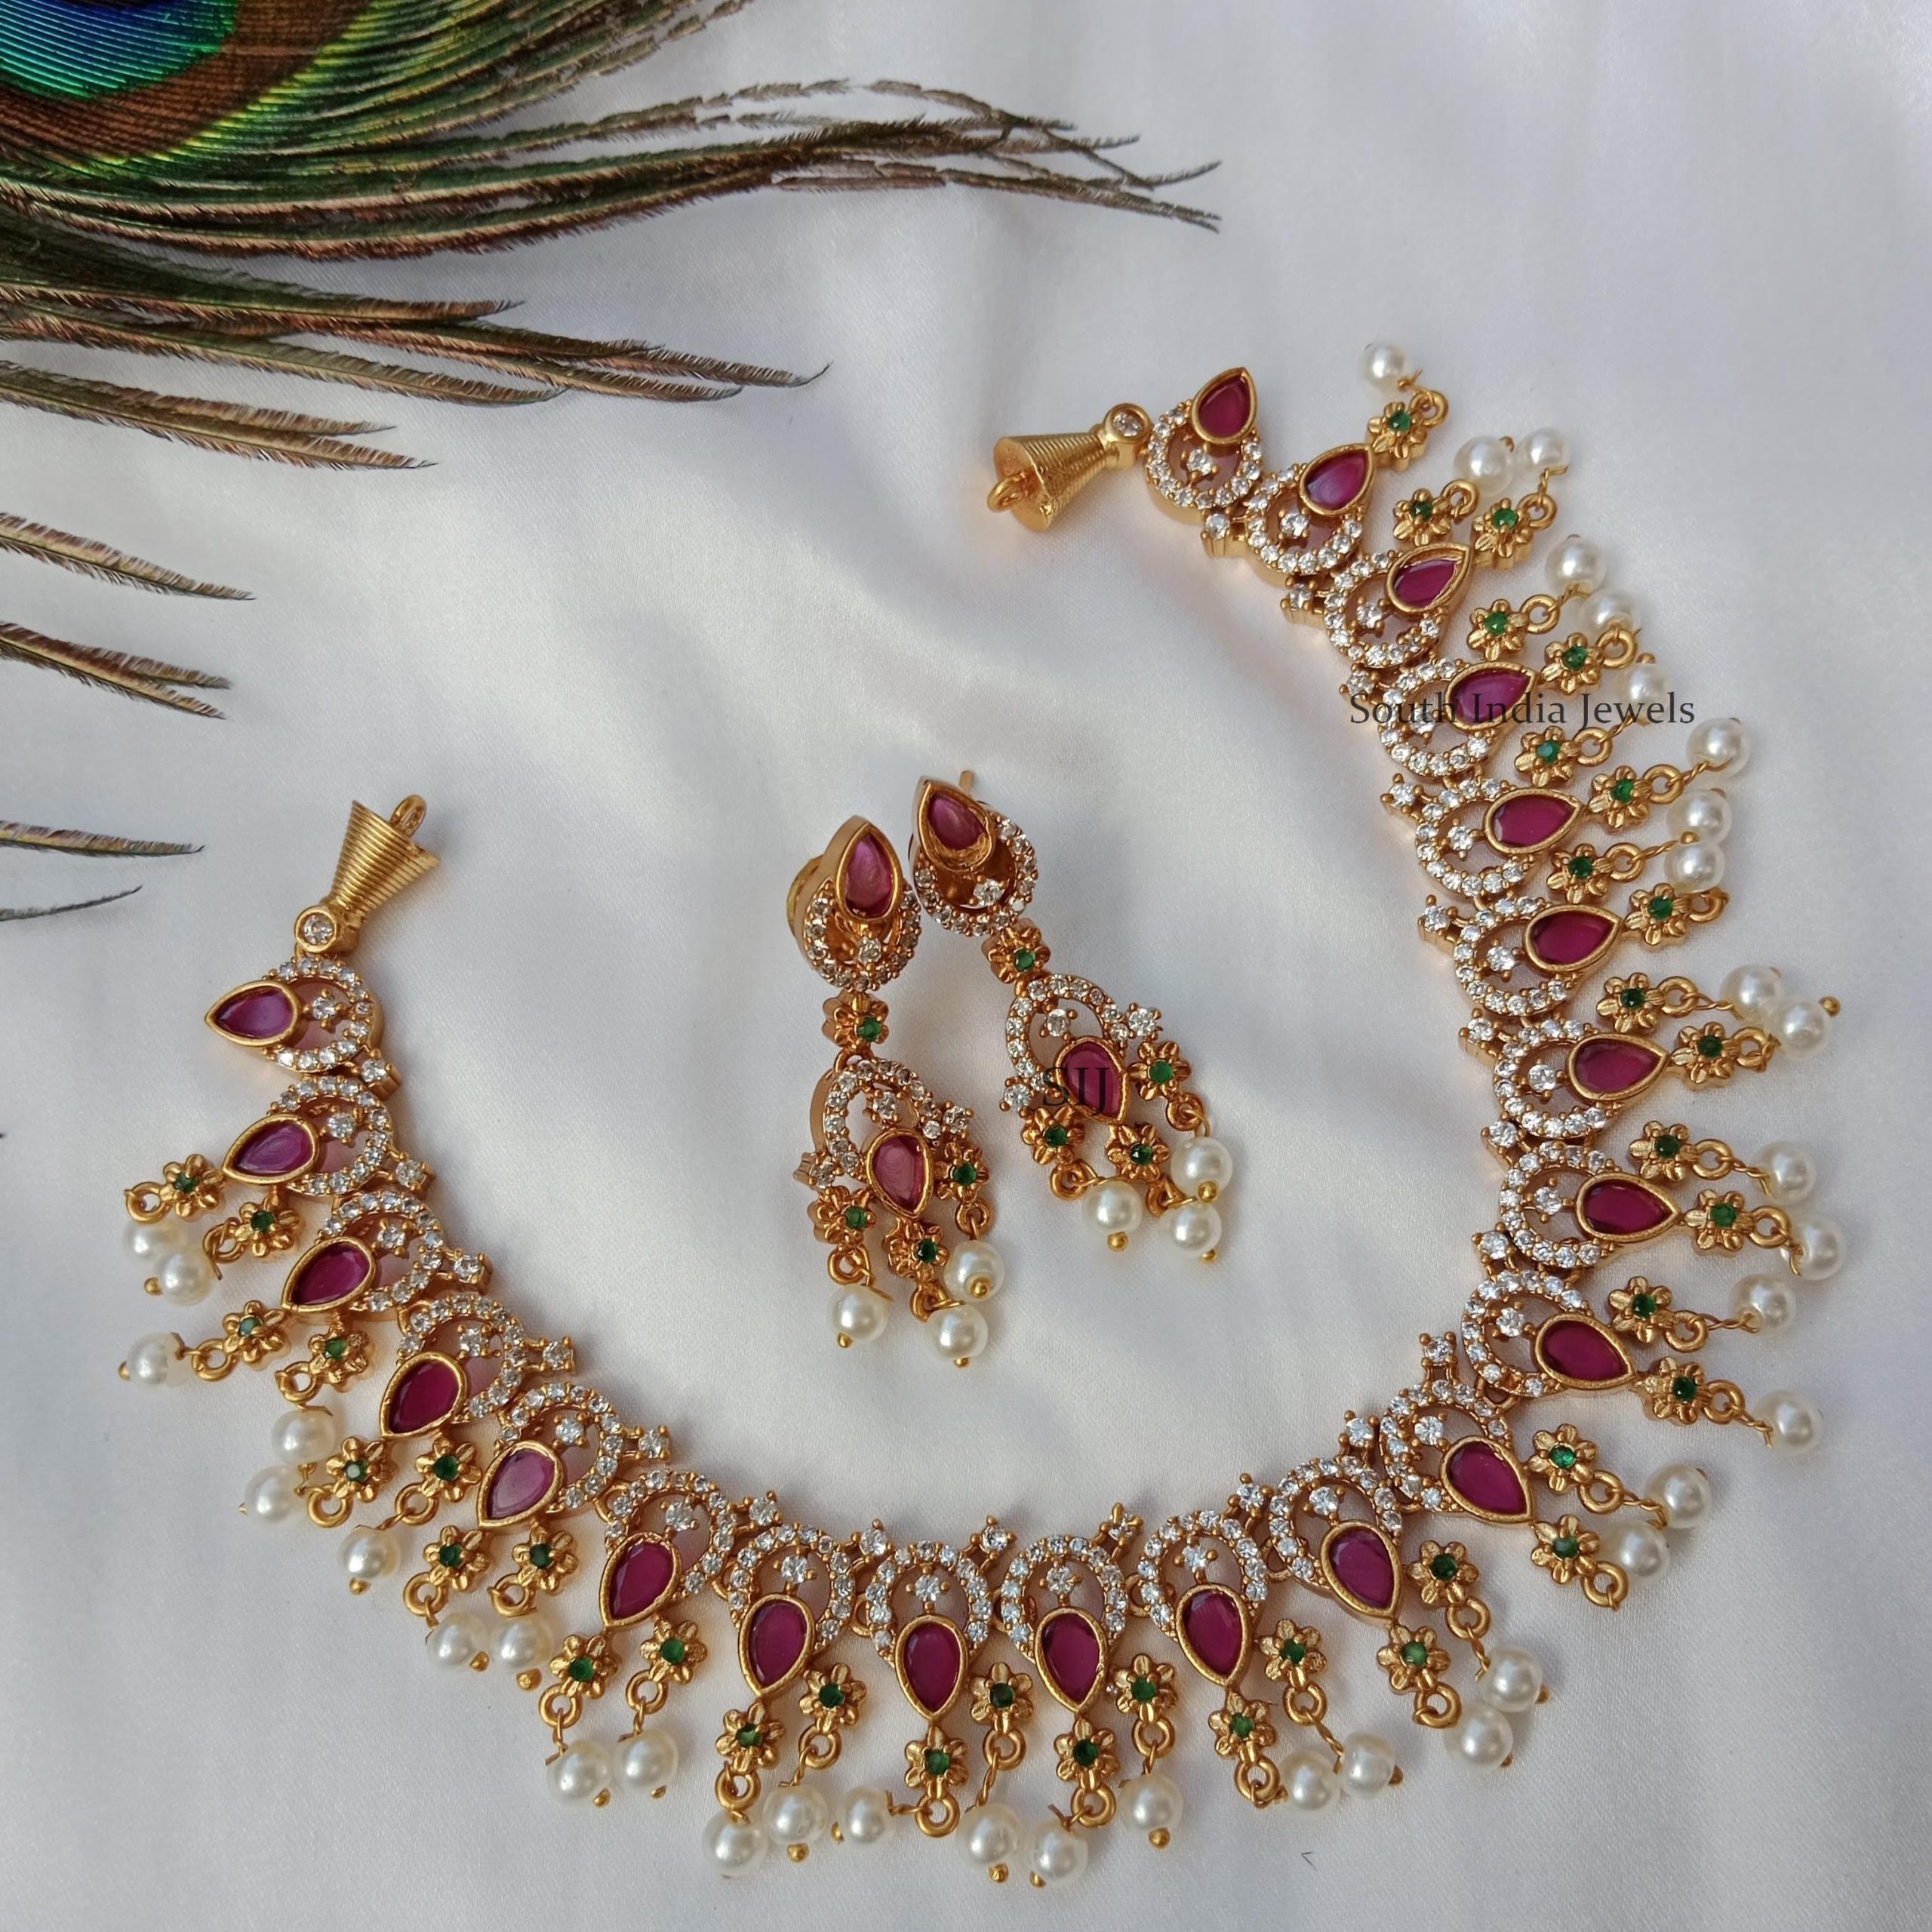 AD Ruby Stones Necklace